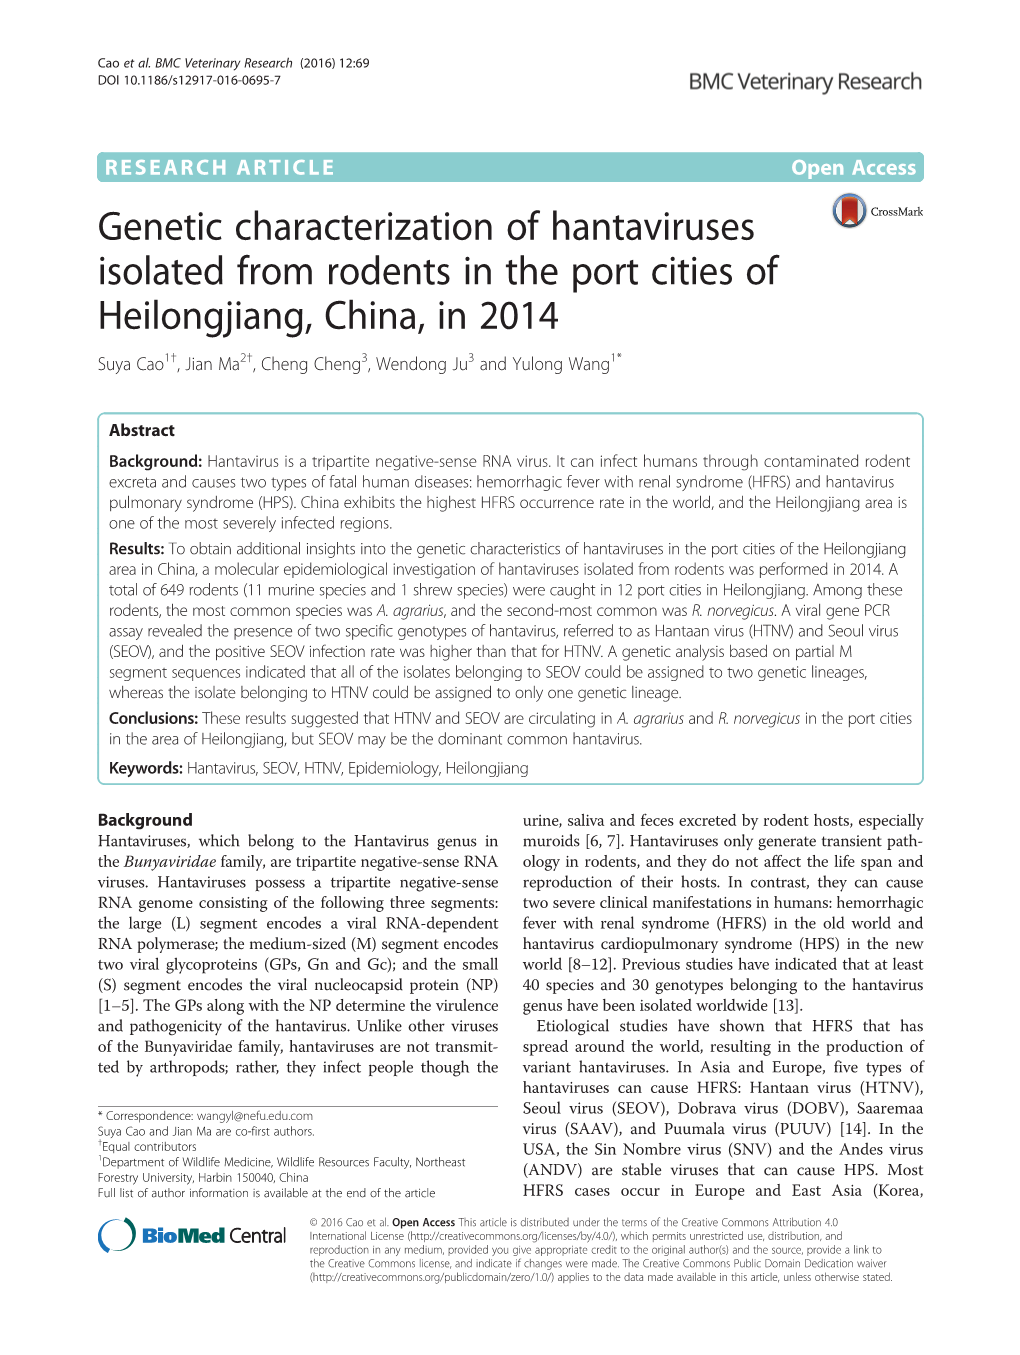 Genetic Characterization of Hantaviruses Isolated from Rodents